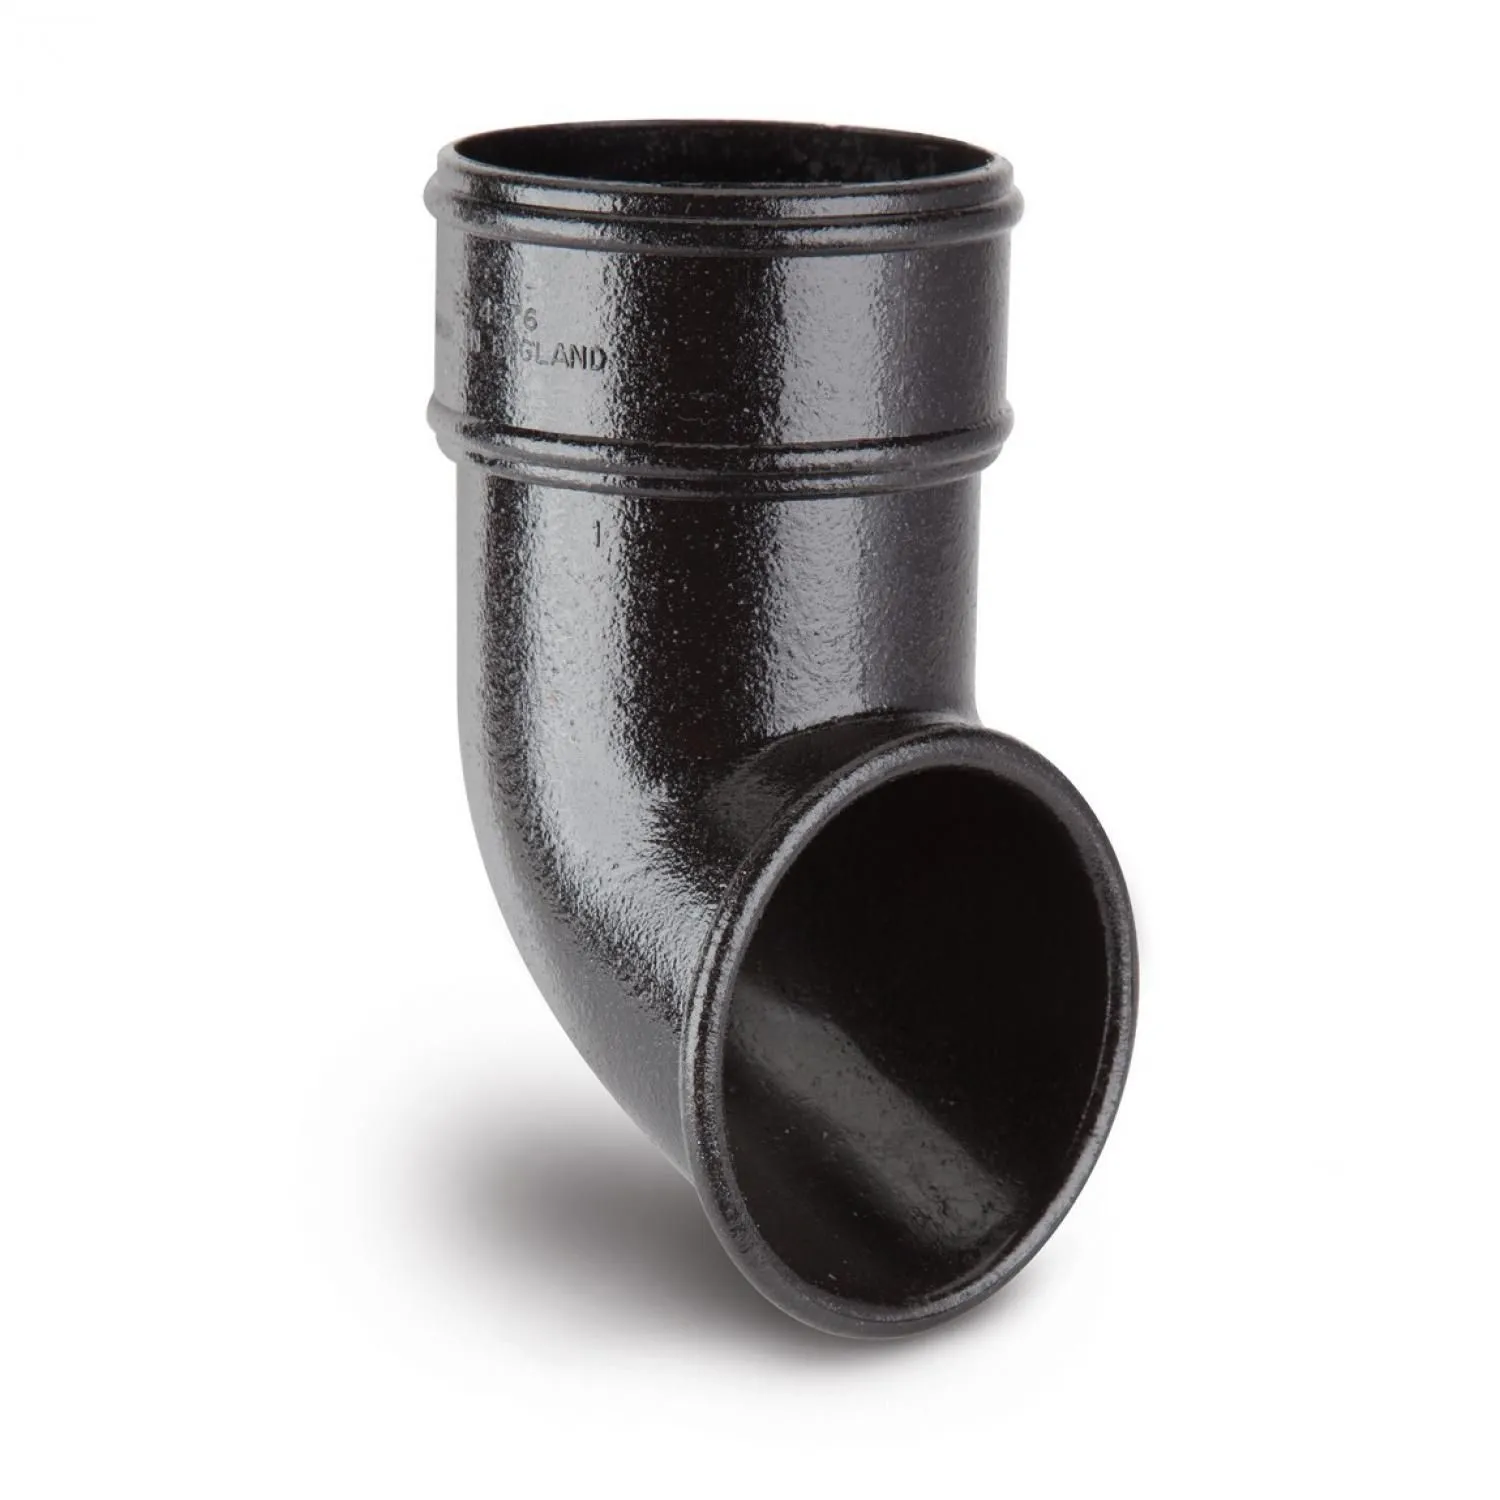 Polypipe Elegance 68mm Downpipe Shoe Black